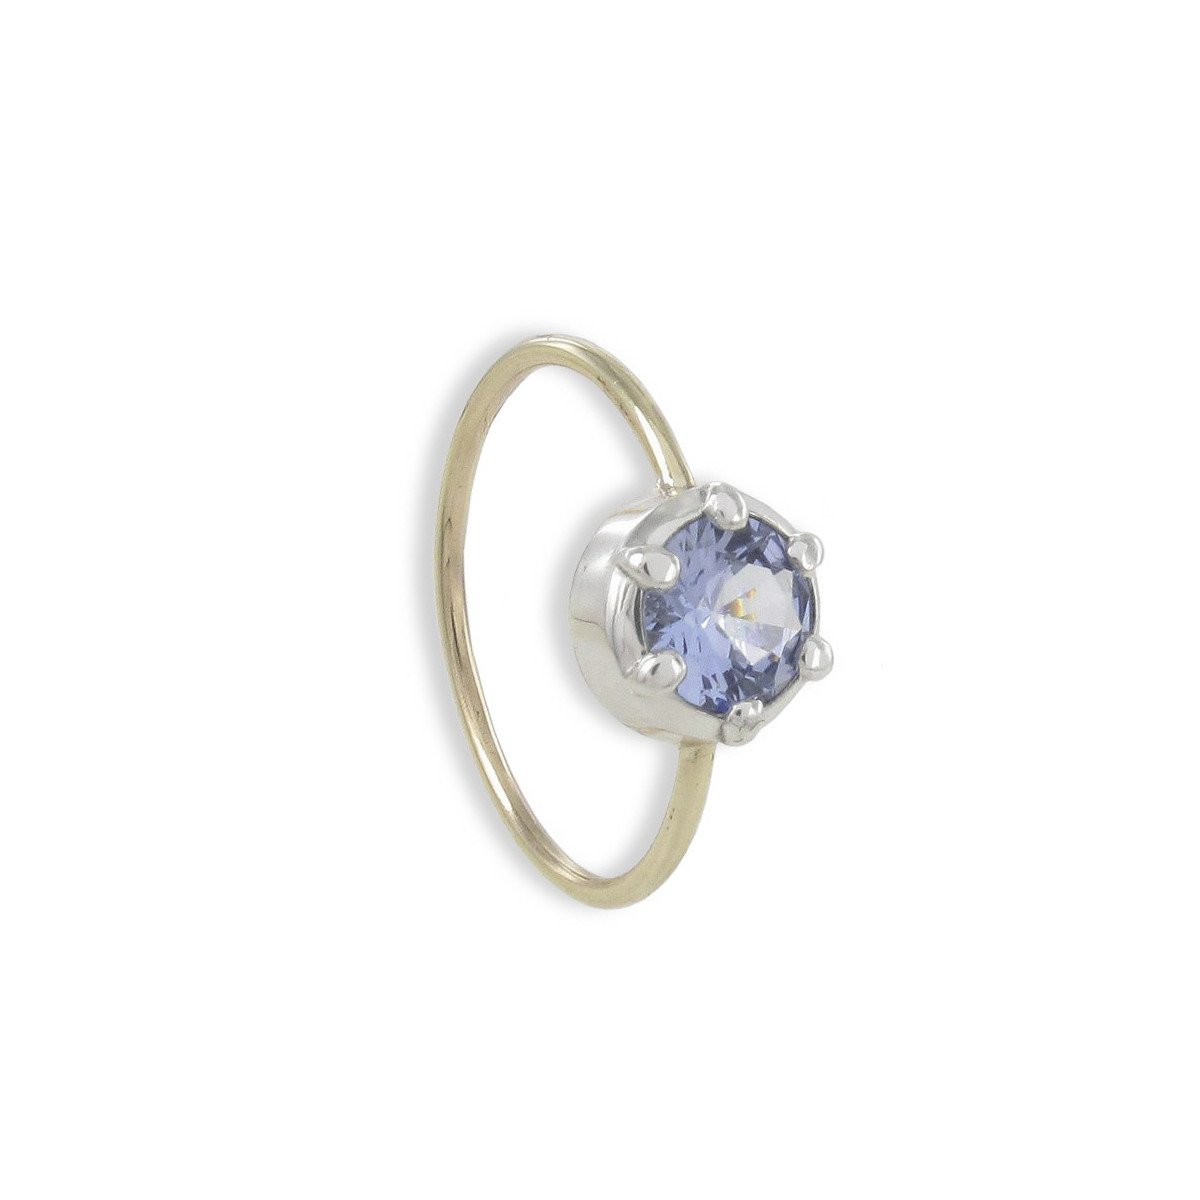 FINE GOLD RING WITH BLUE TOPAZ